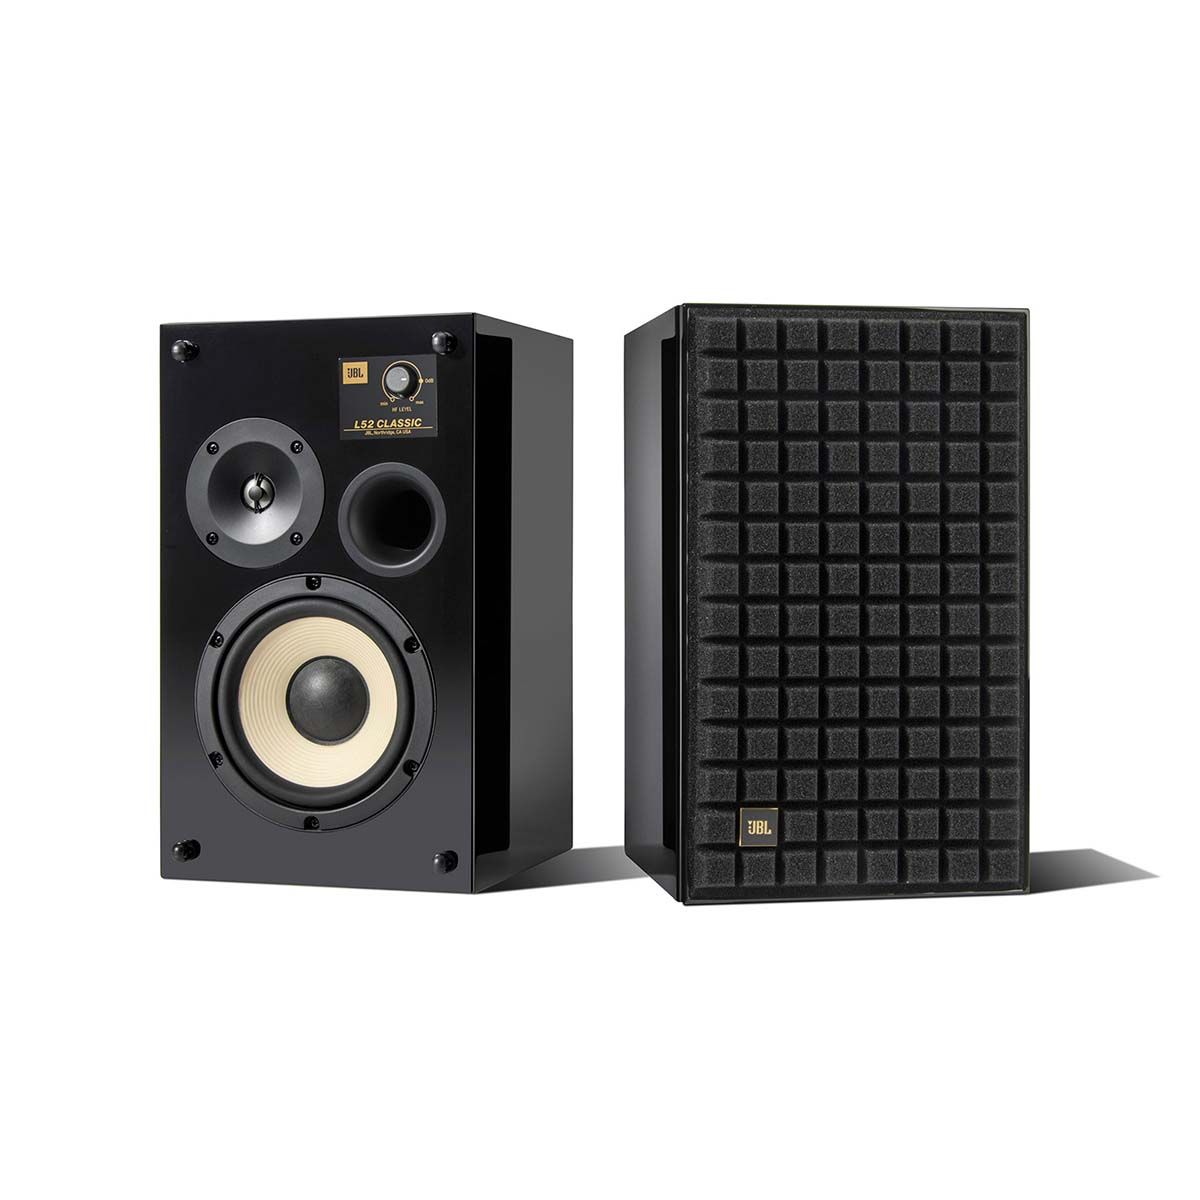 JBL L52 Classic Loudspeaker - Limited Edition Gloss Black - Pair angled front view of pair, one with grille, one without grille